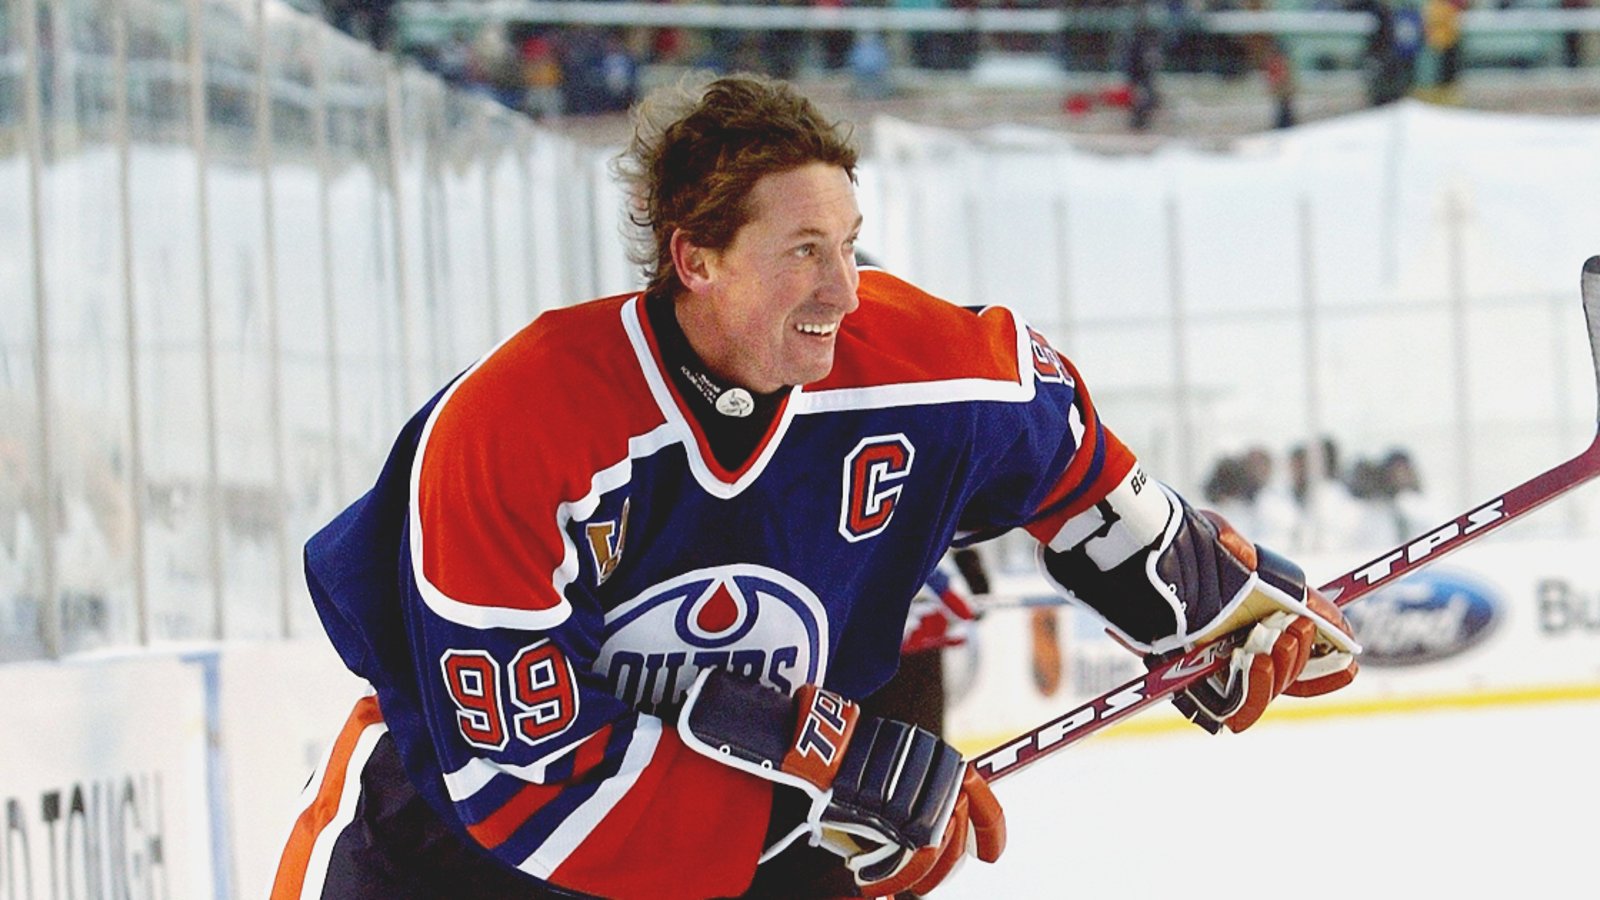 Wayne Gretzky had some advice to give to the Oilers after last night’s defeat.